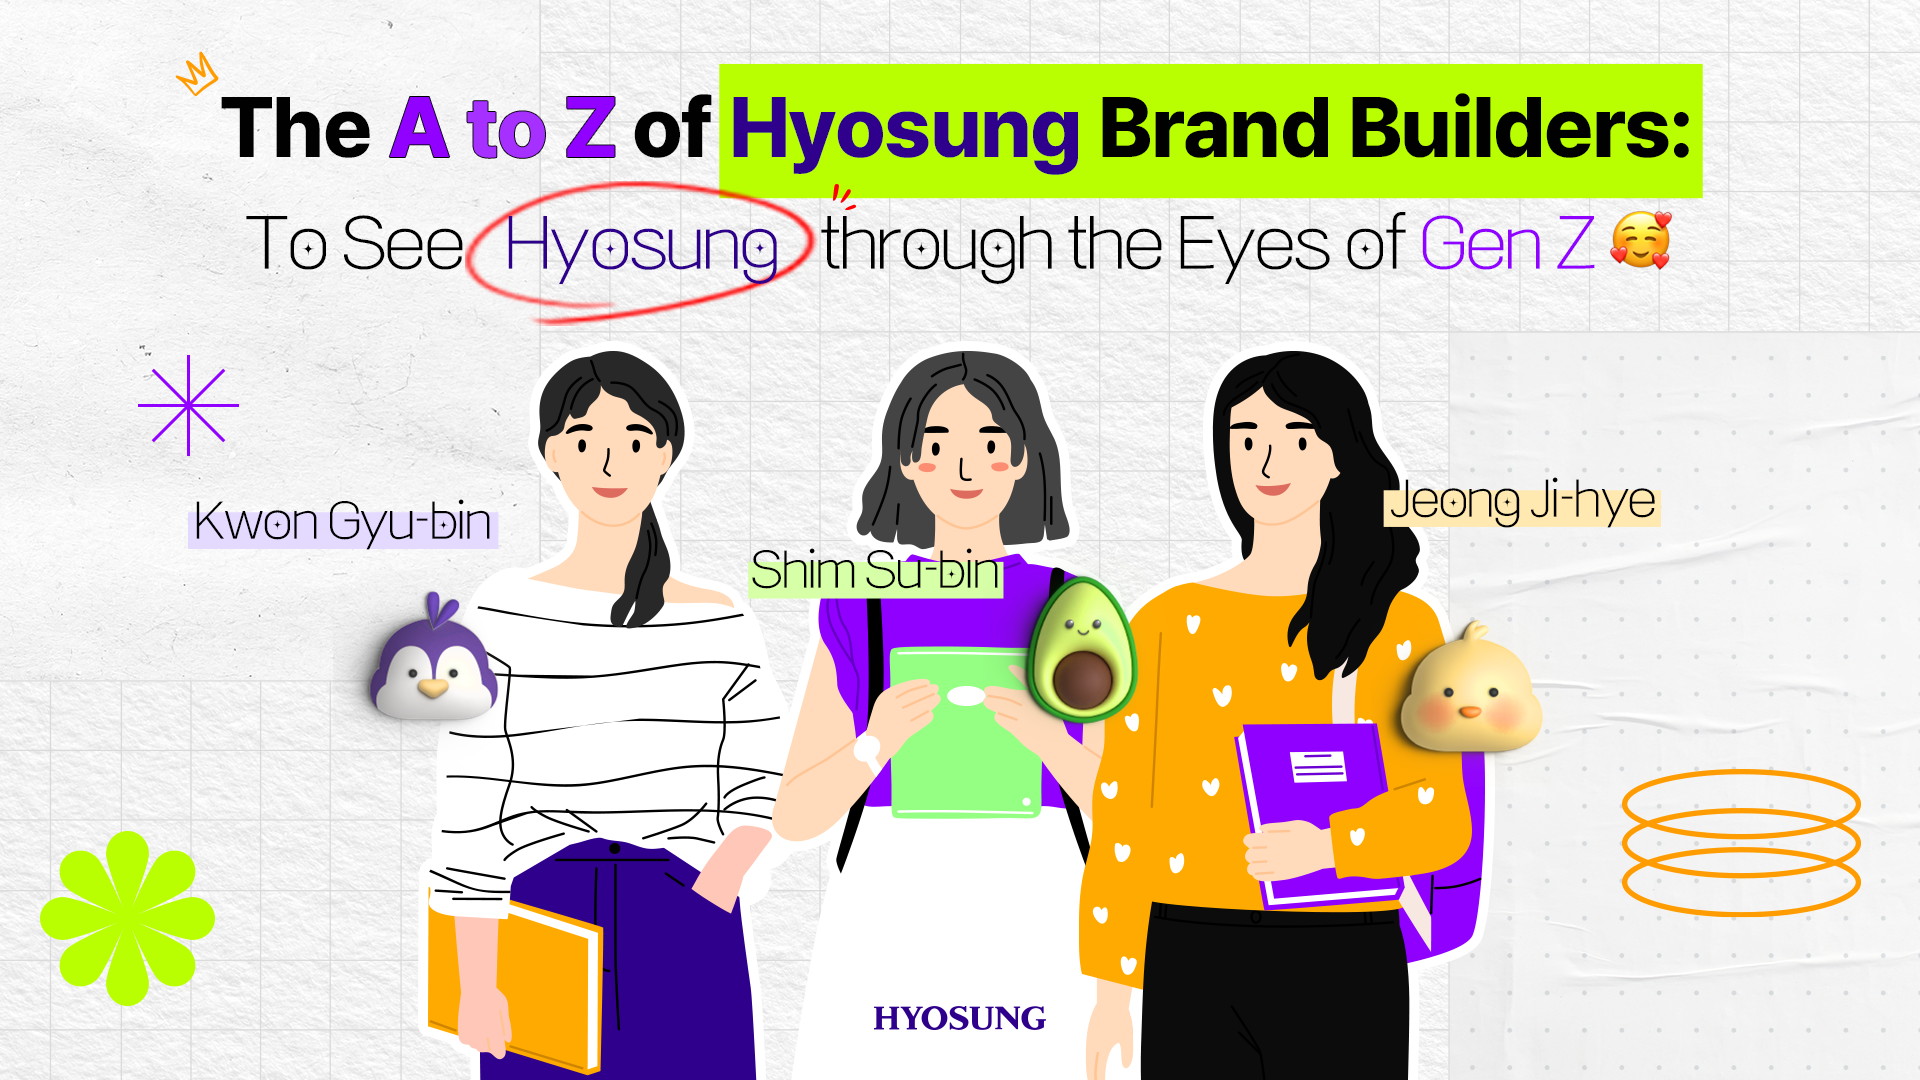 The A to Z of Hyosung Brand Builders: To See Hyosung through the Eyes of Gen Z